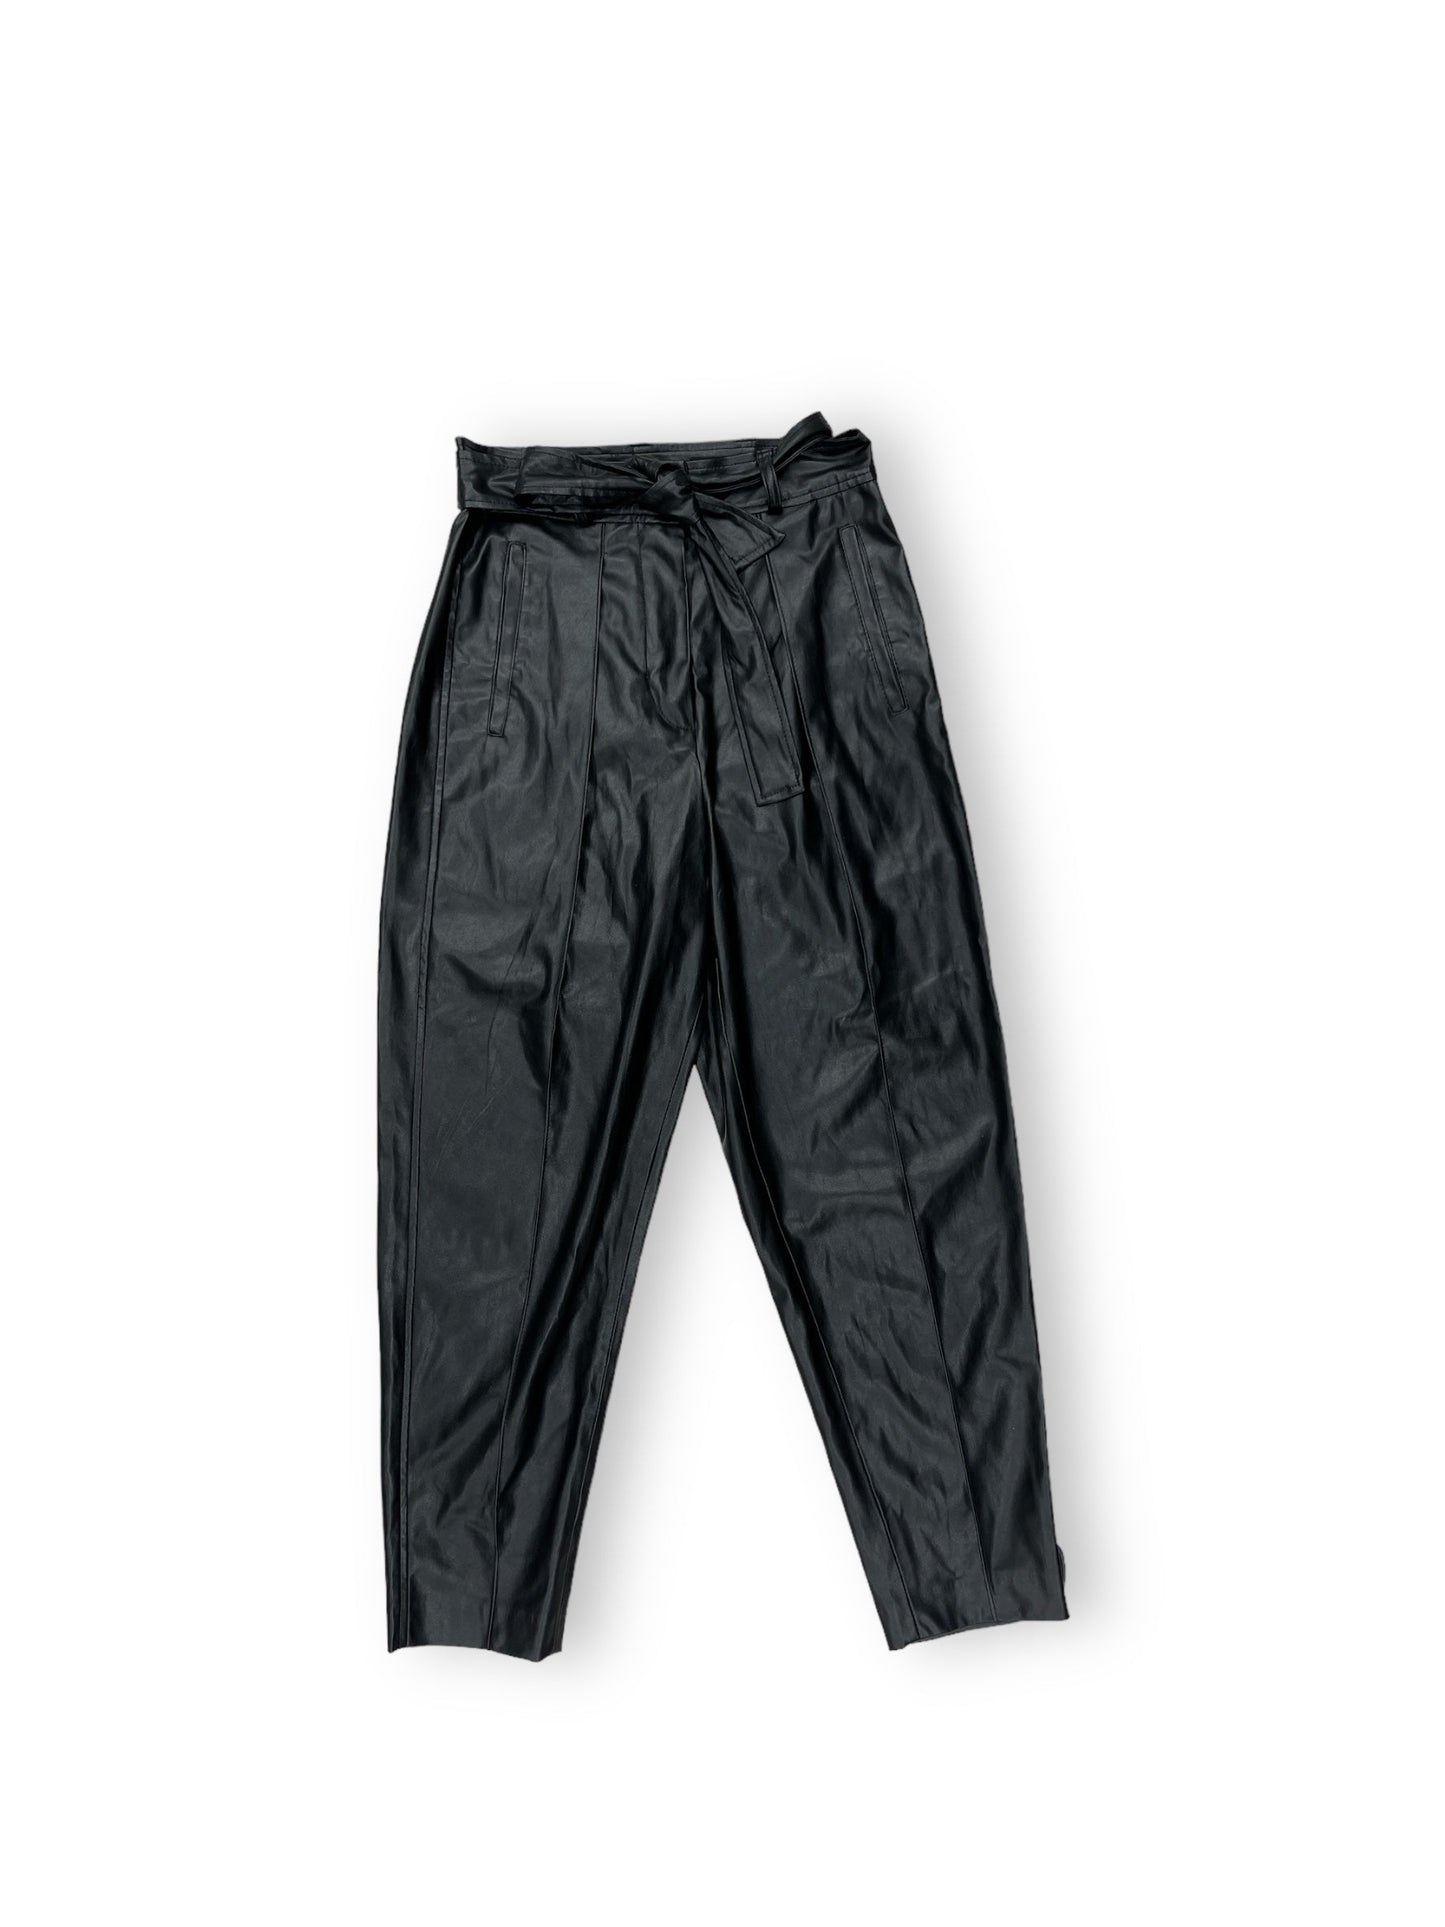 Pants Ankle By Blanknyc  Size: 26